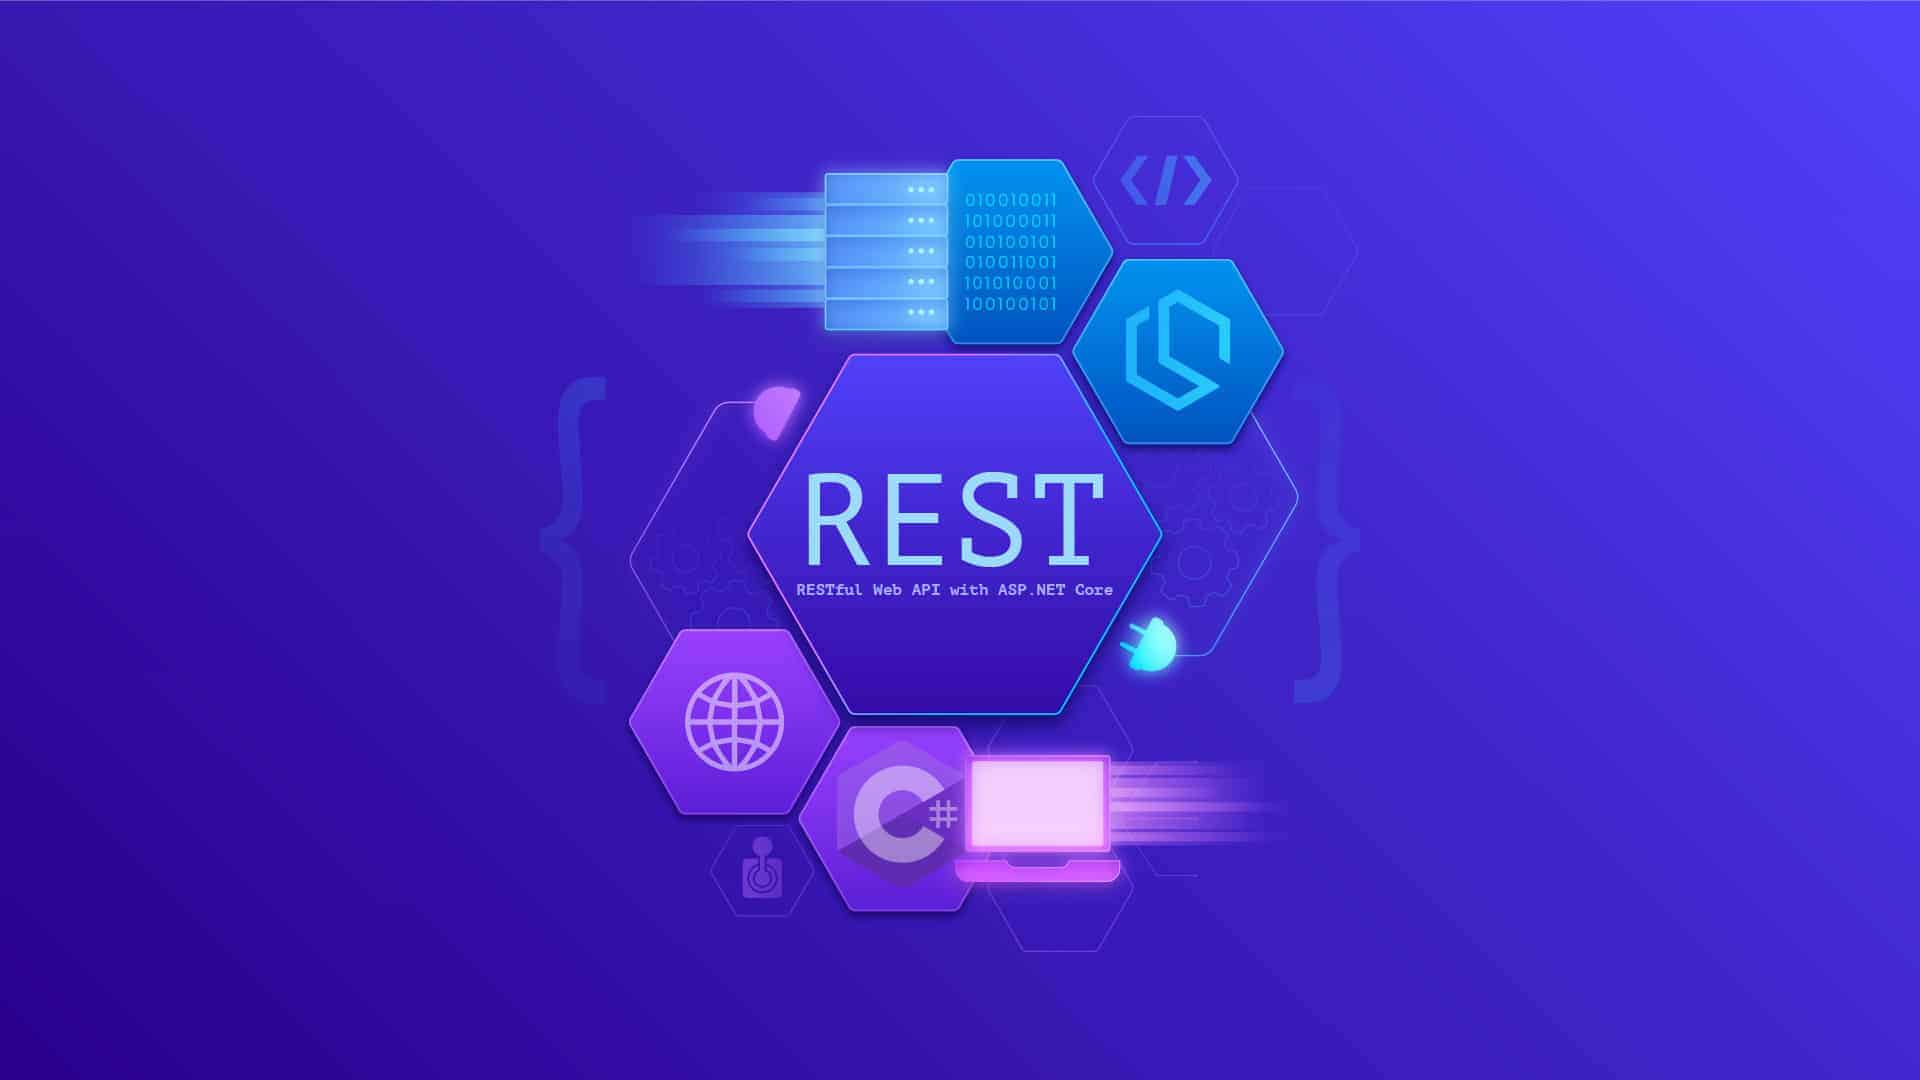 How to build a RESTful Web API using .NET Core and EF Core